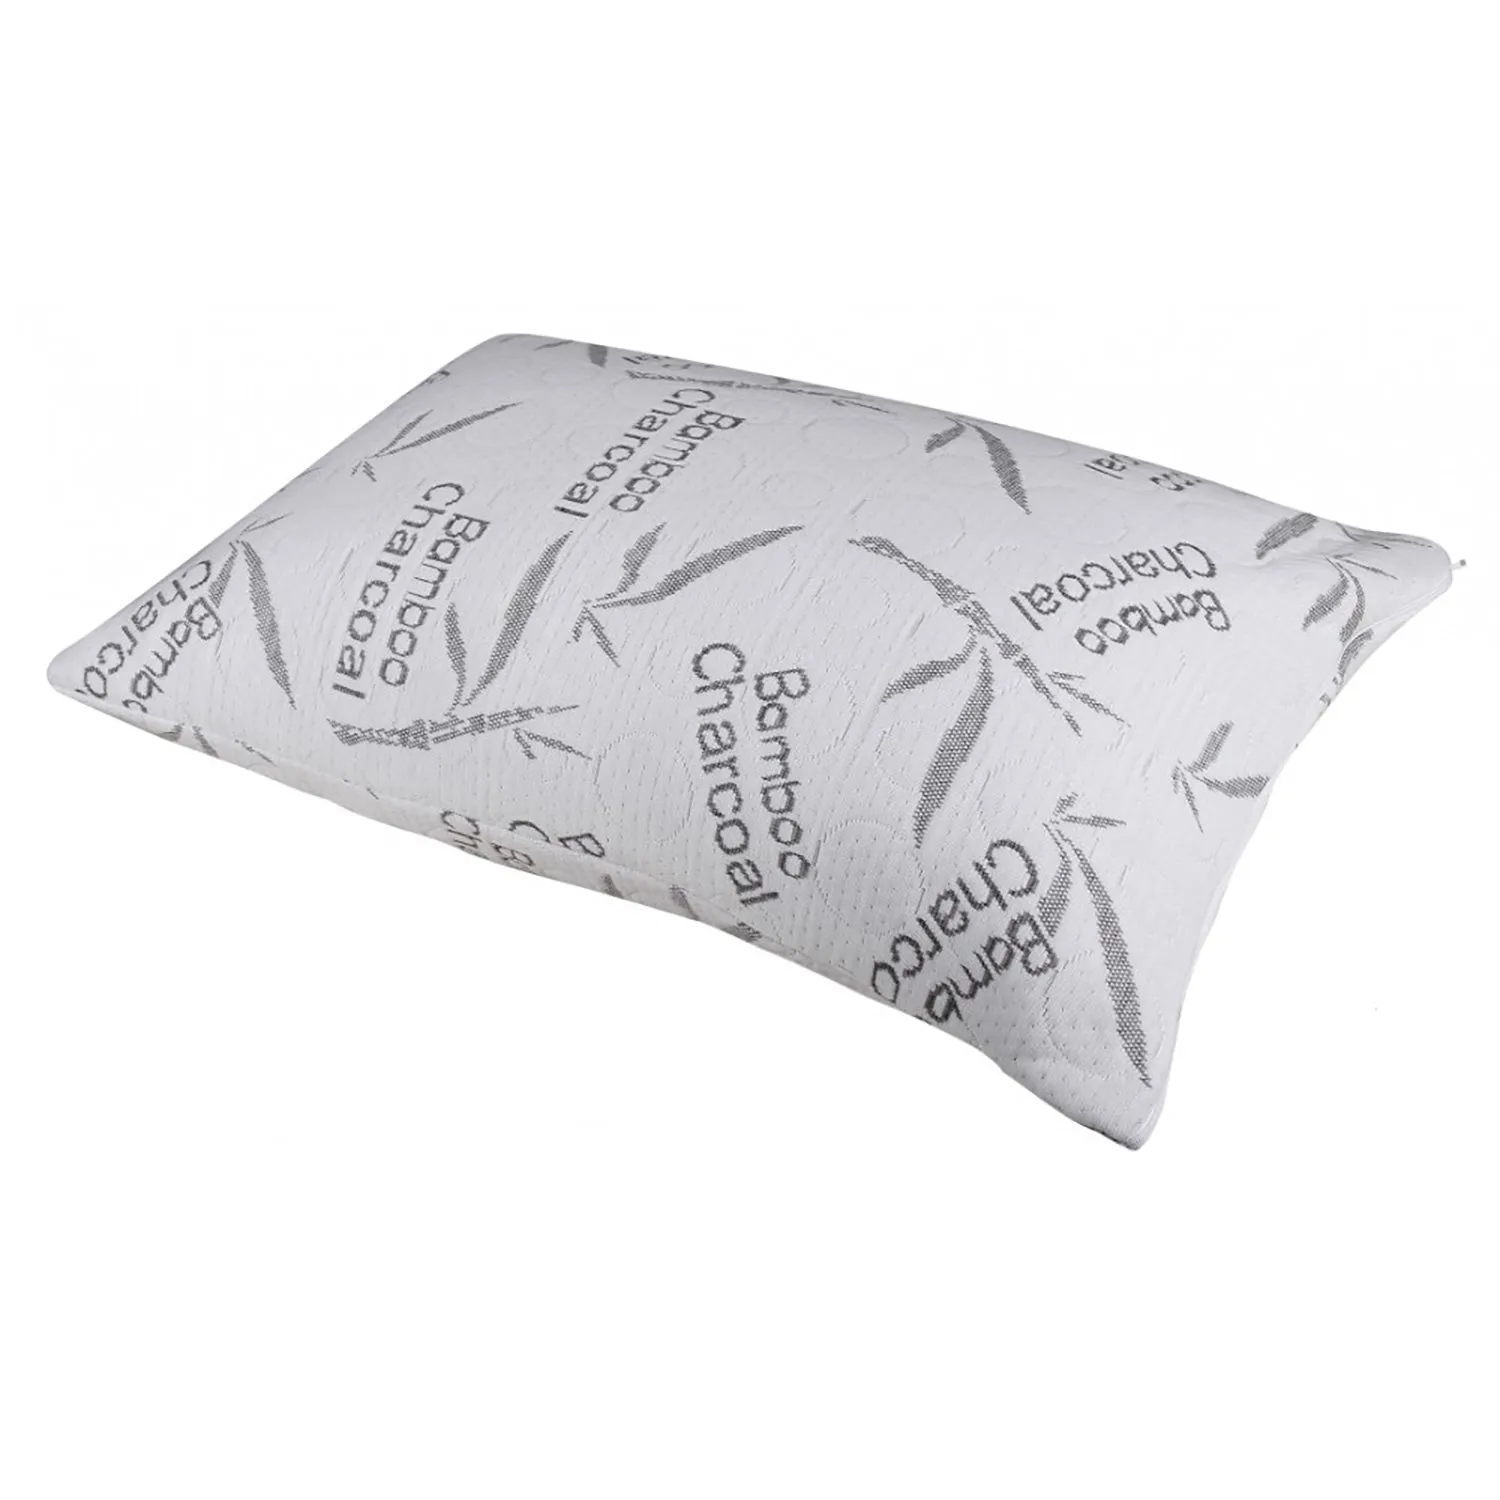 StarNight - Memory Foam Pillow, Charcoal Bamboo, Hypoallergenic, King Size